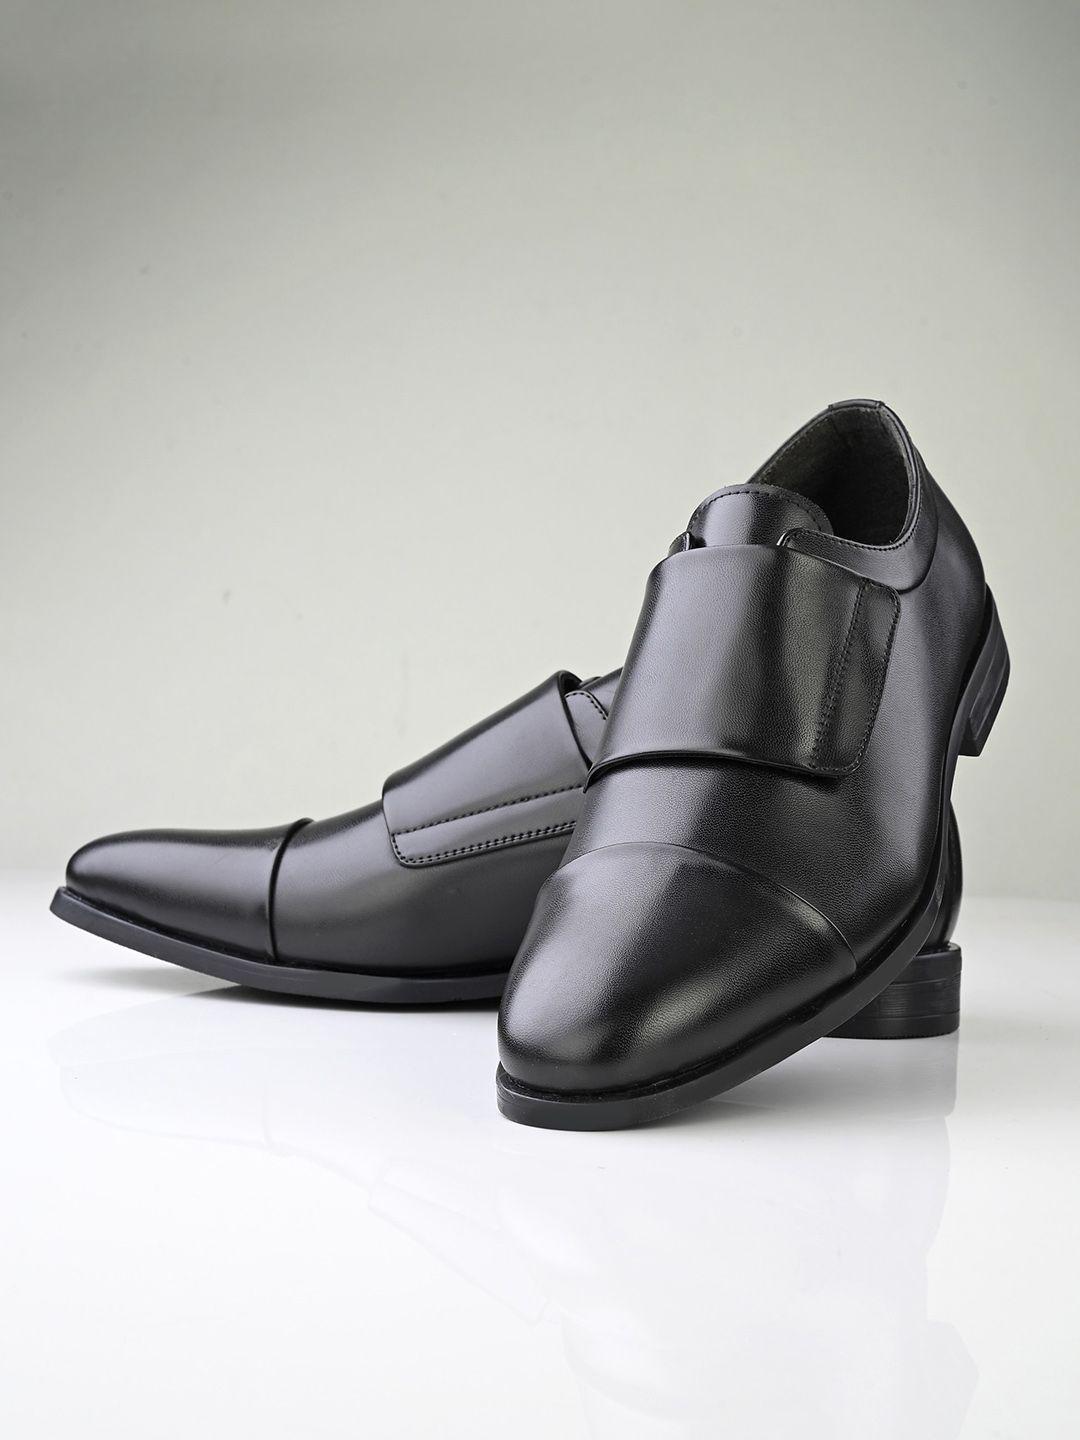 house of pataudi men textured formal slip on shoes